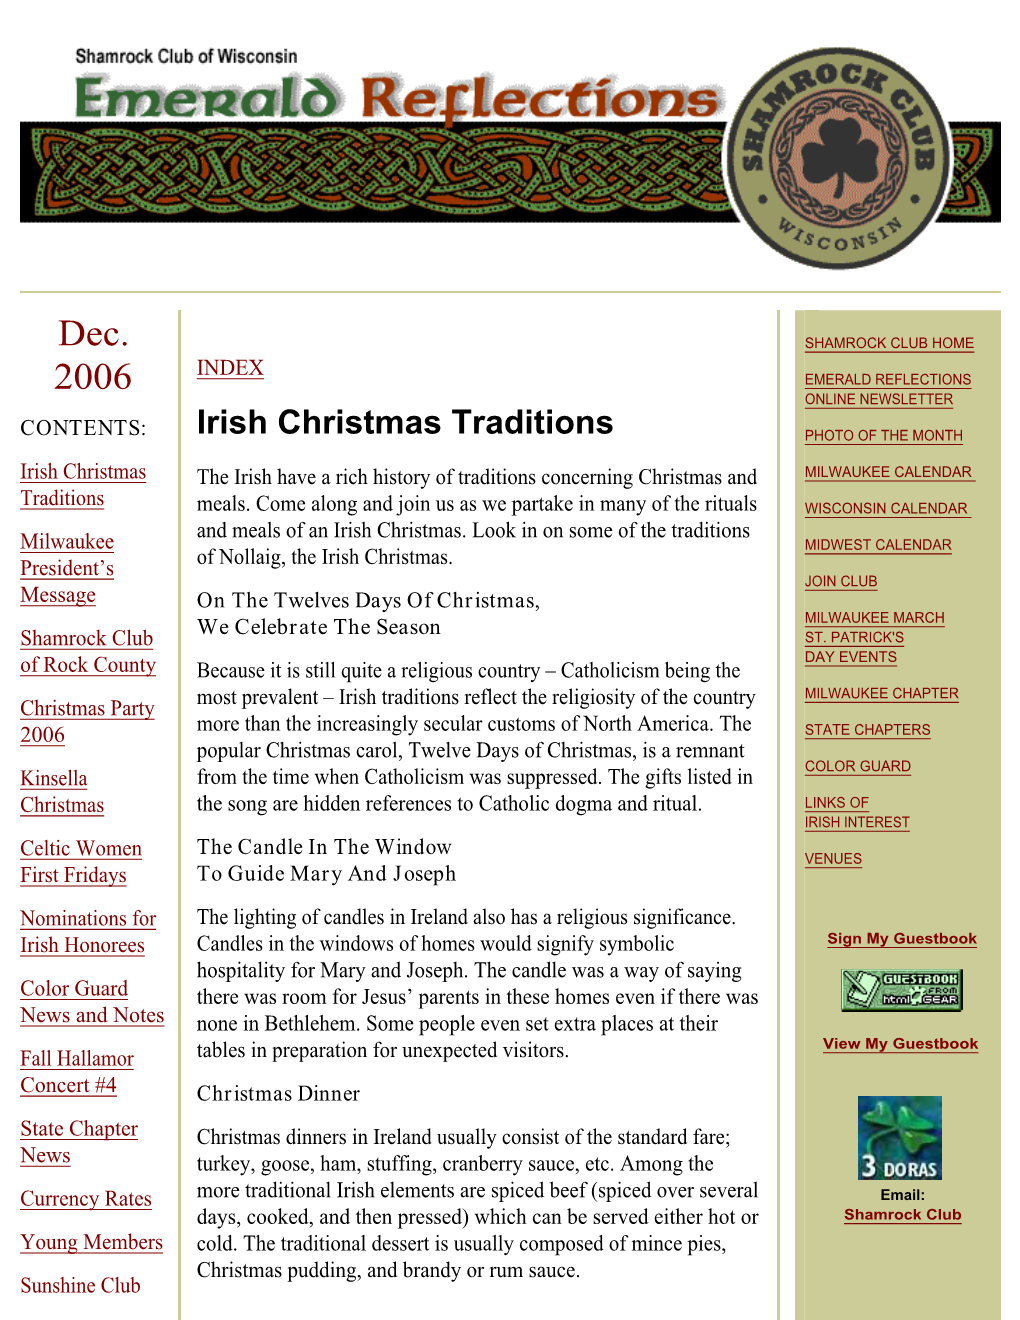 Irish Christmas Traditions PHOTO of the MONTH Irish Christmas the Irish Have a Rich History of Traditions Concerning Christmas and MILWAUKEE CALENDAR Traditions Meals